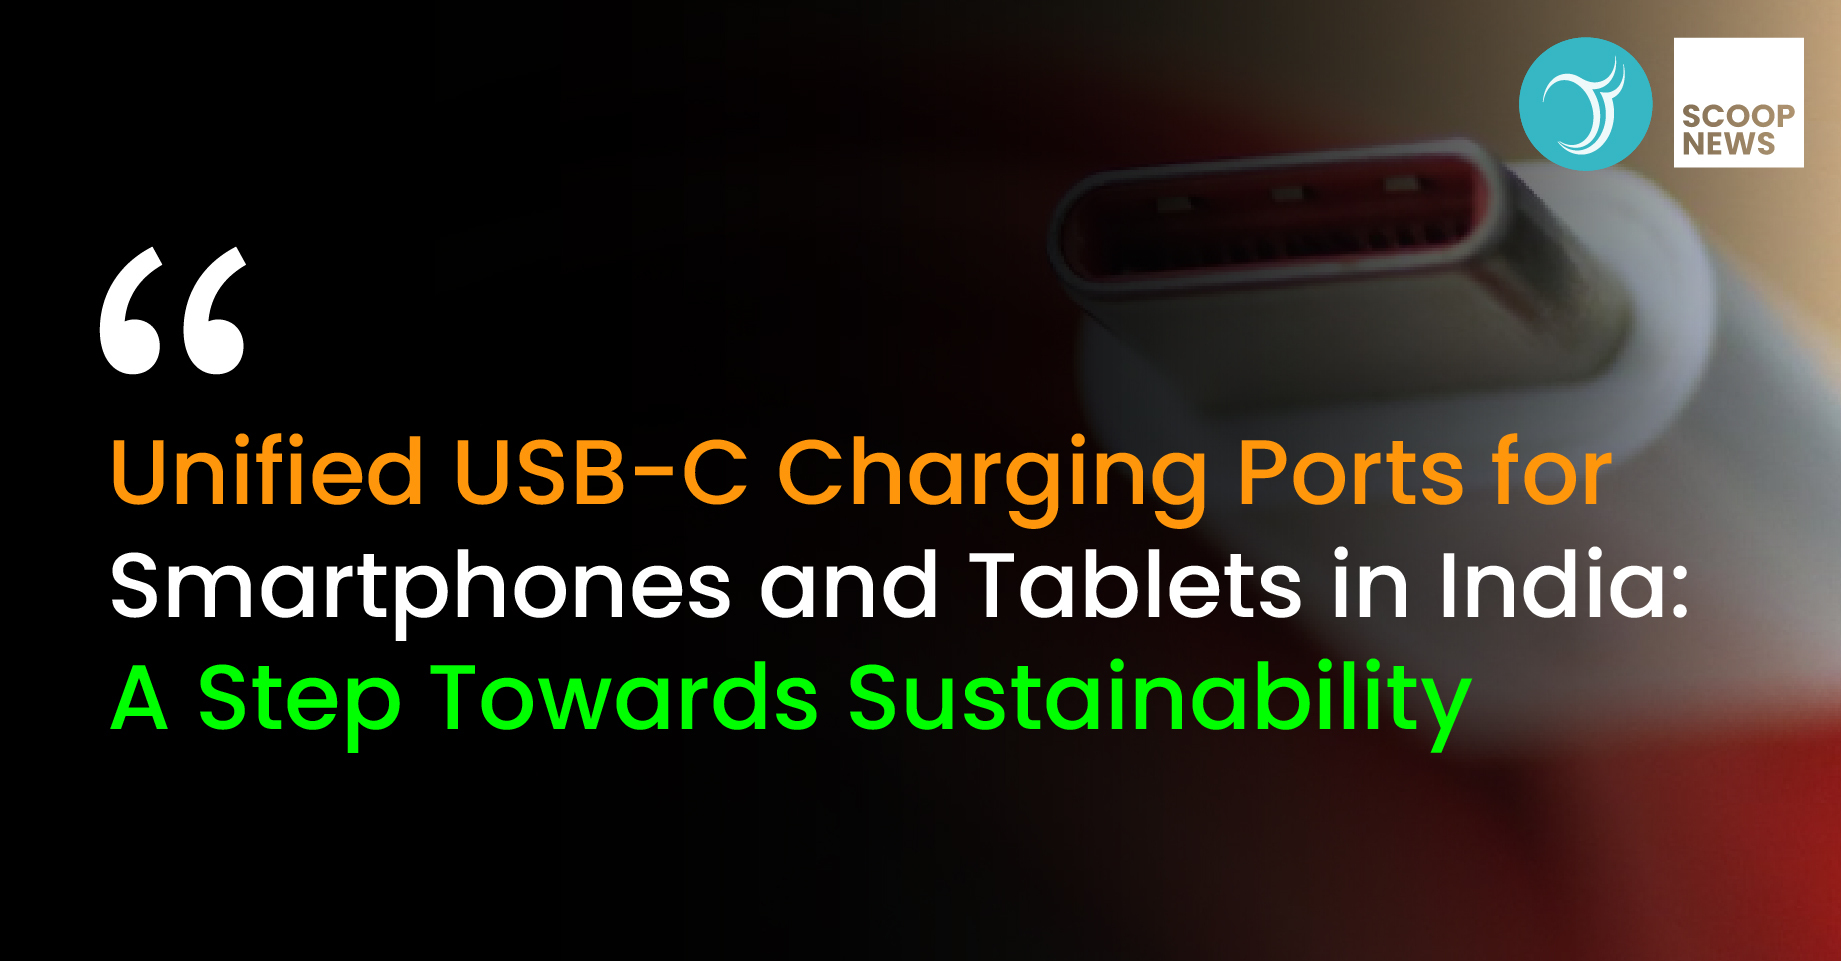 Unified USB-C Charging Ports for Smartphones and Tablets in India: A Step Towards Sustainability